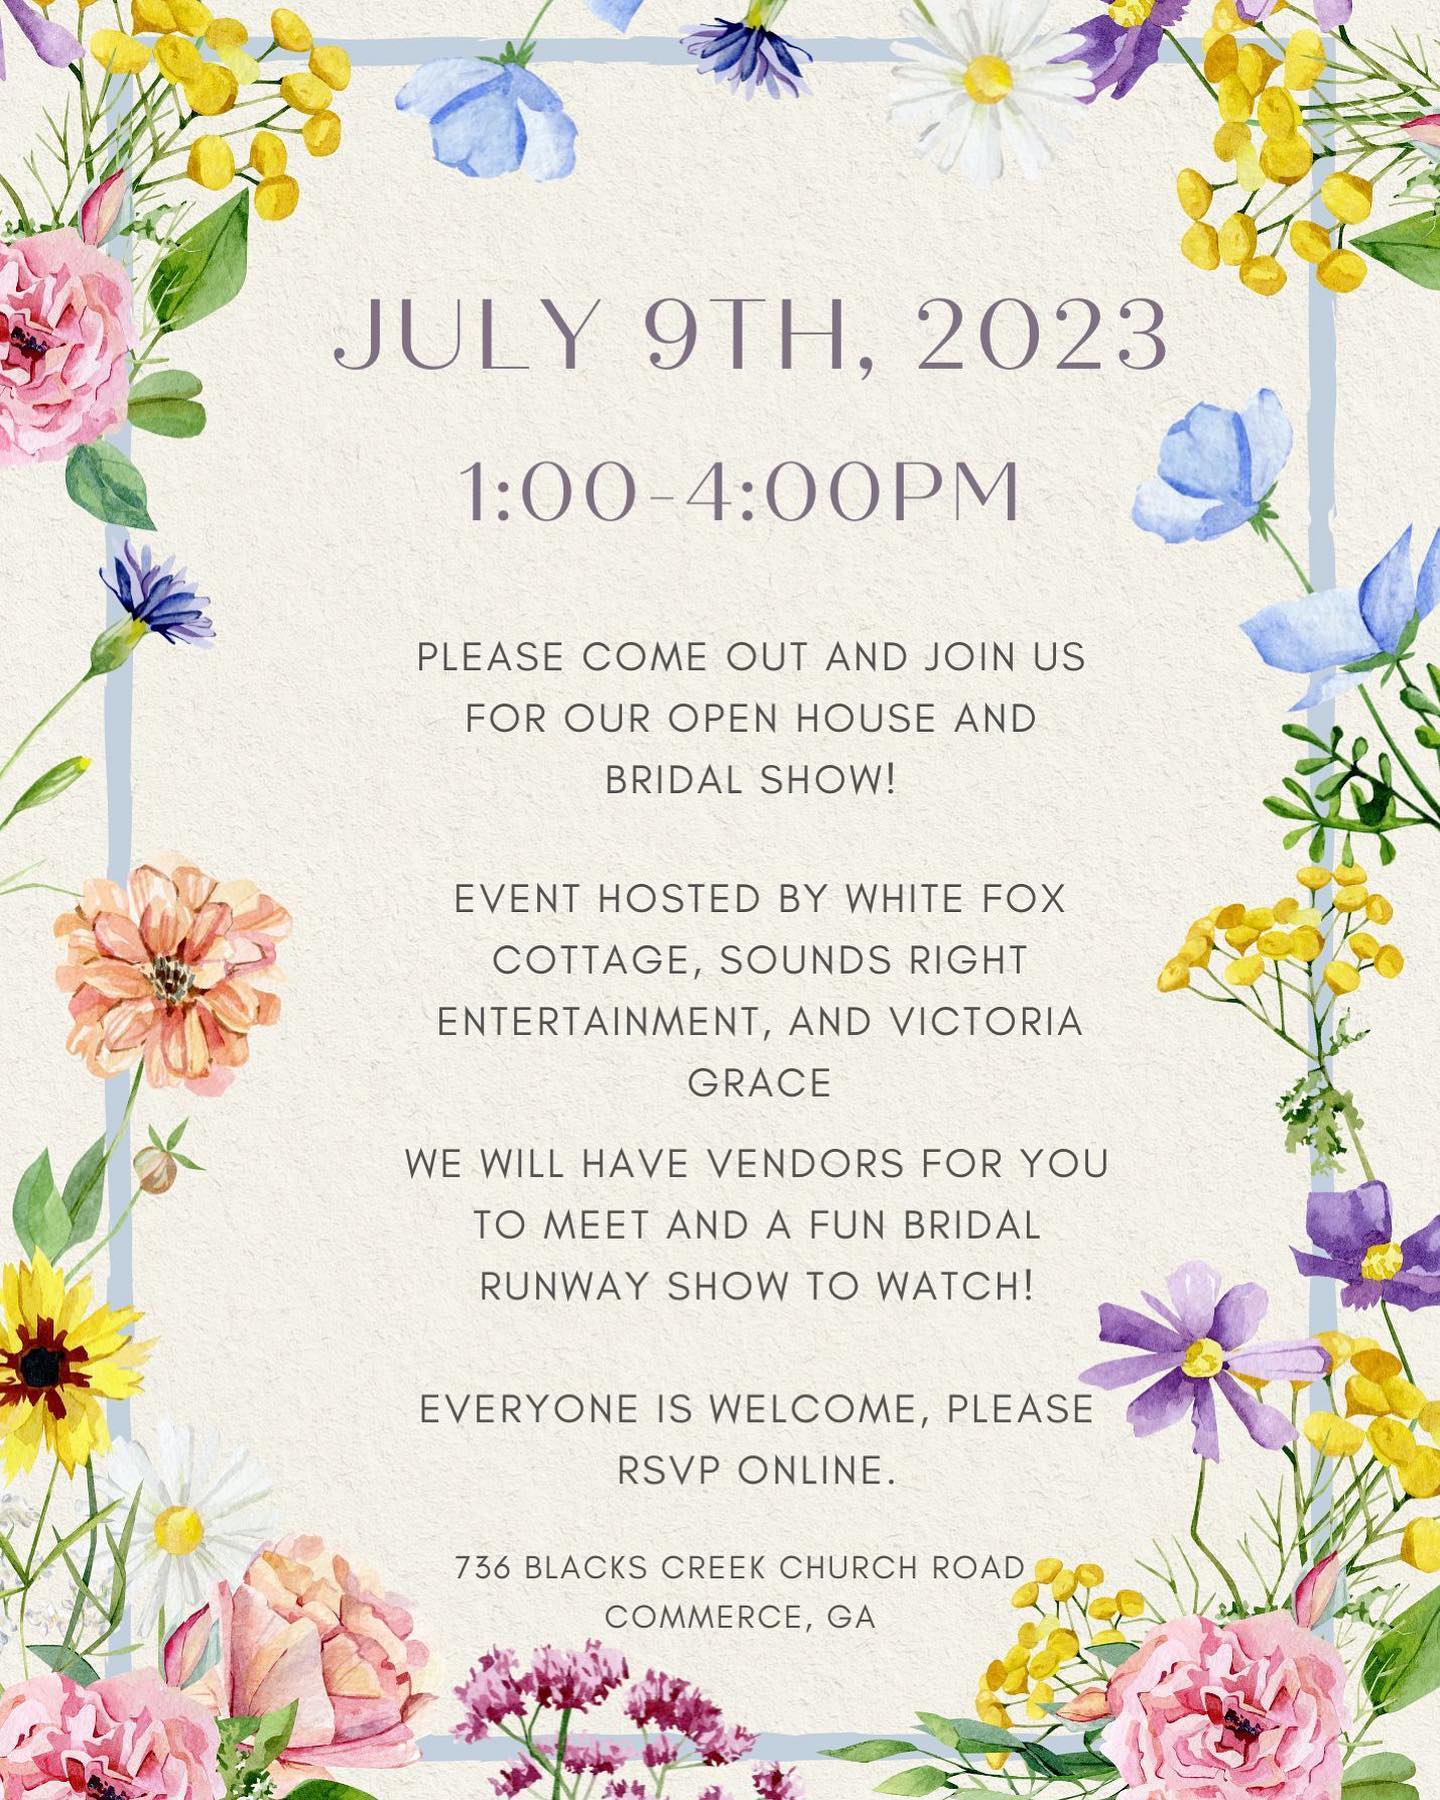 White Fox Cottage Open House & Bridal Show July 2023